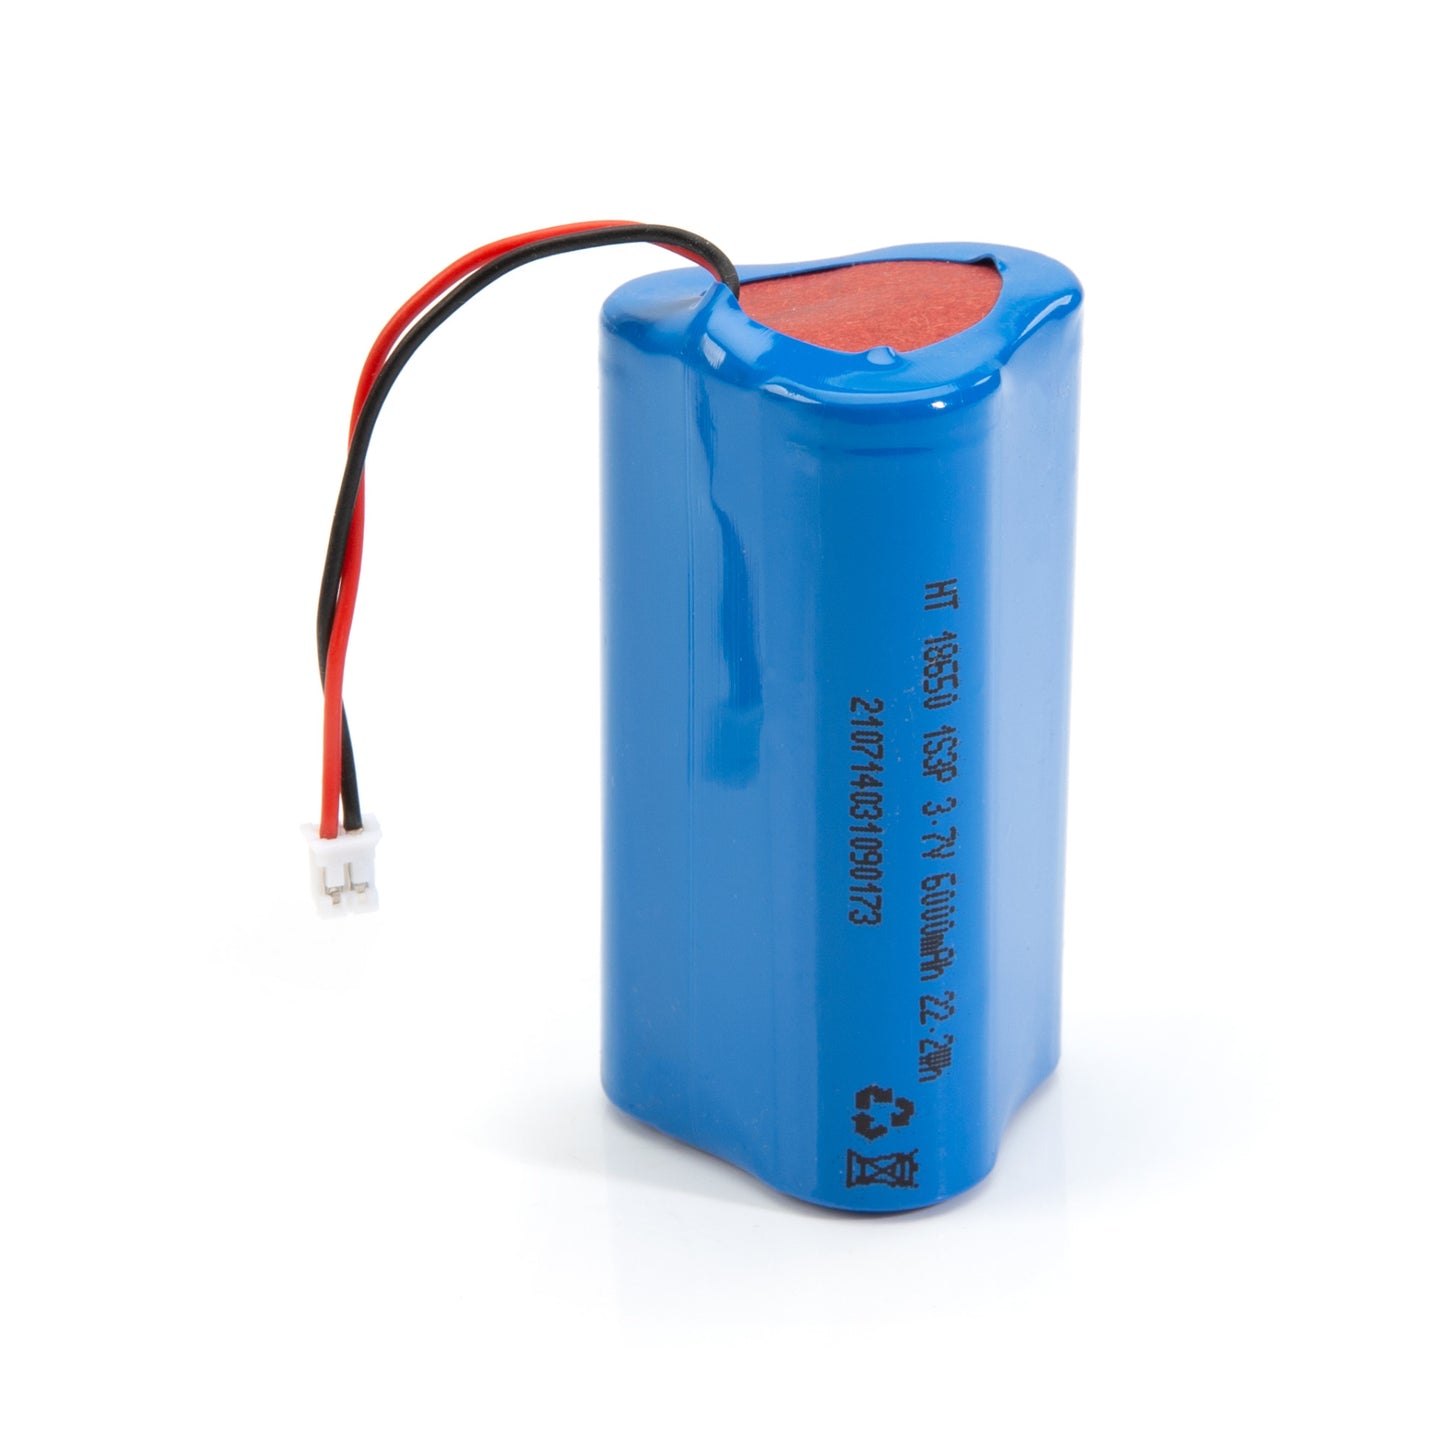 Rechargeable Li-Ion 3.7V 600mAh Replacement / Backup Battery Pack